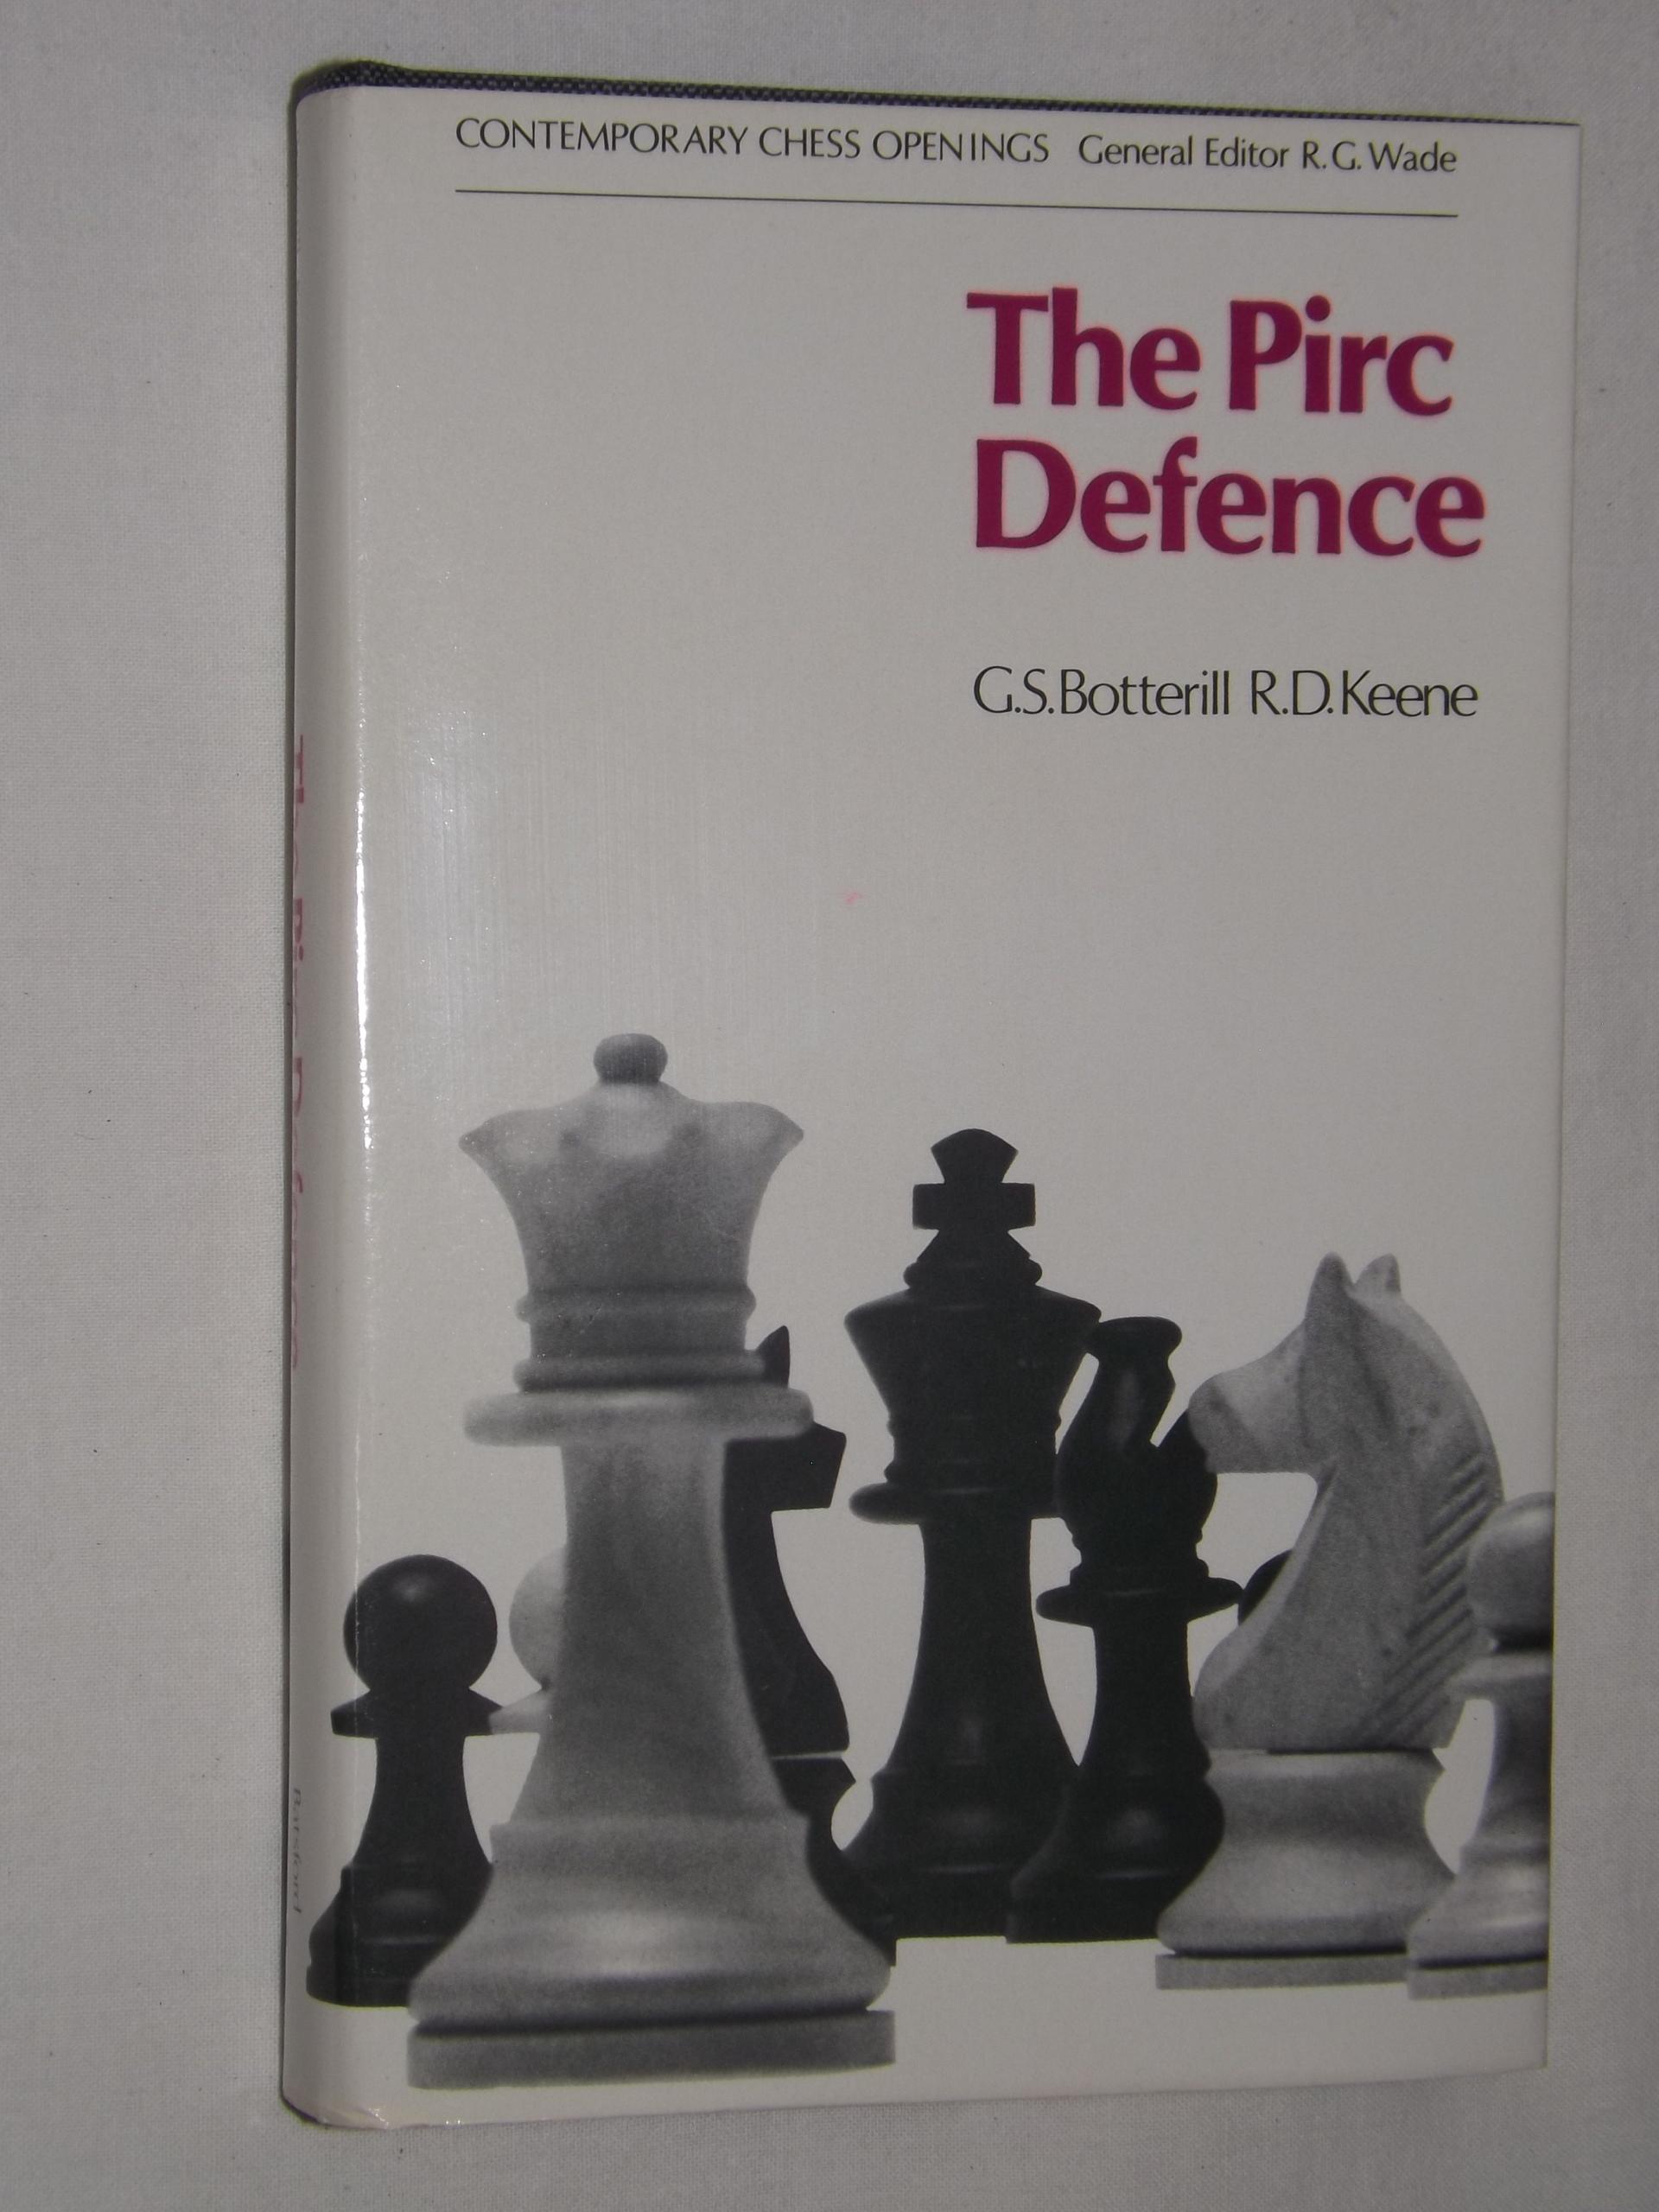 The Pirc Defence by G. S. and Keene R. D. Botterill -  Denmark